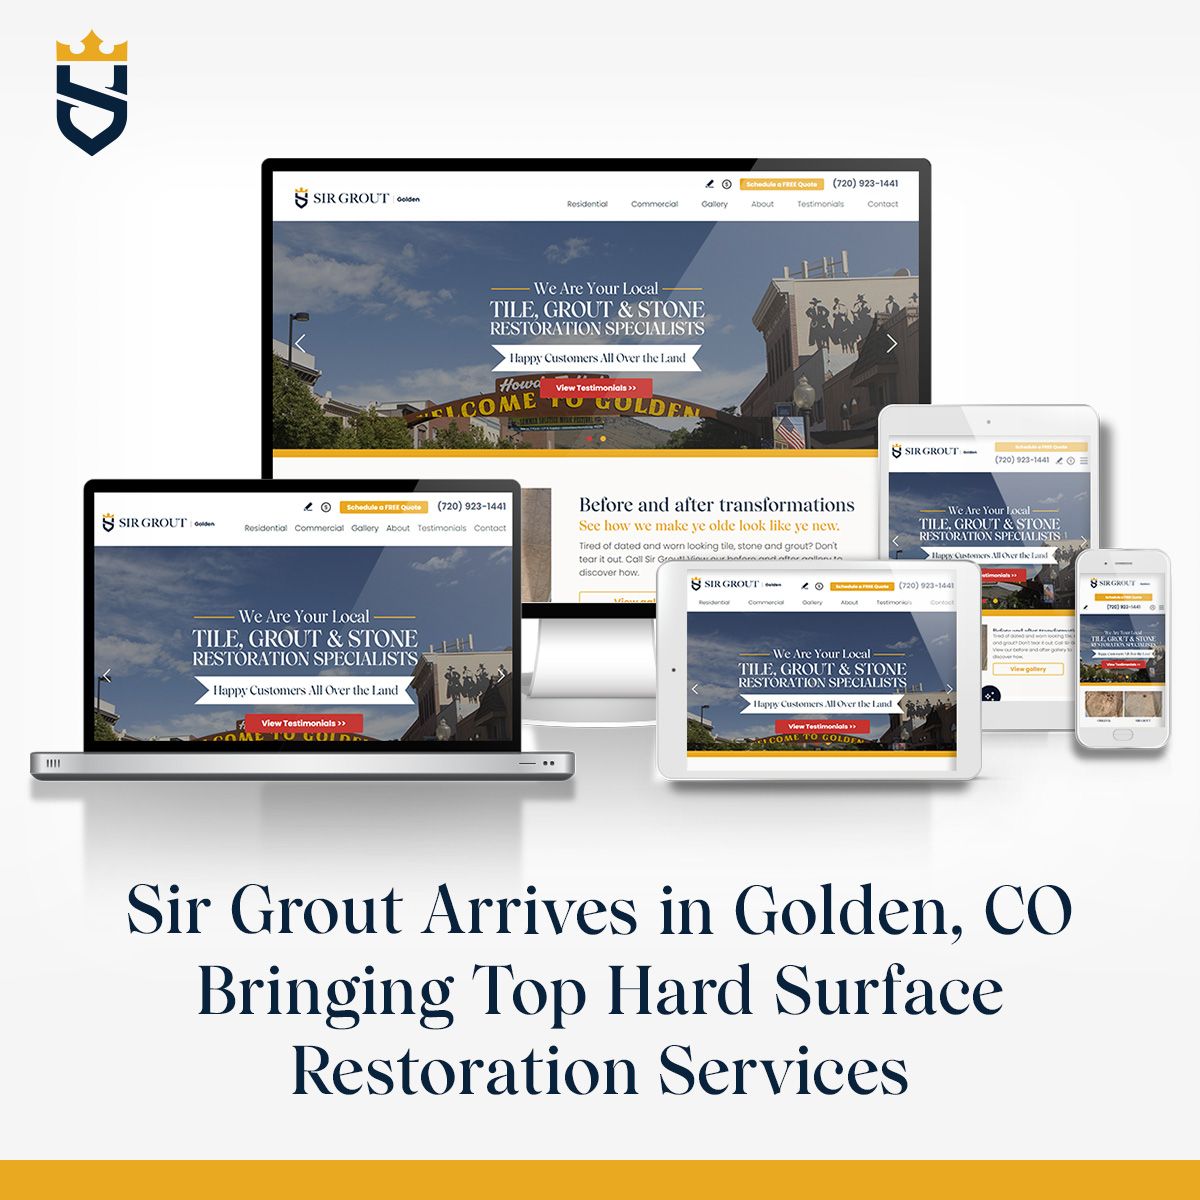 Sir Grout Brings Its Top Hard Surface Restoration Services to Golden, CO